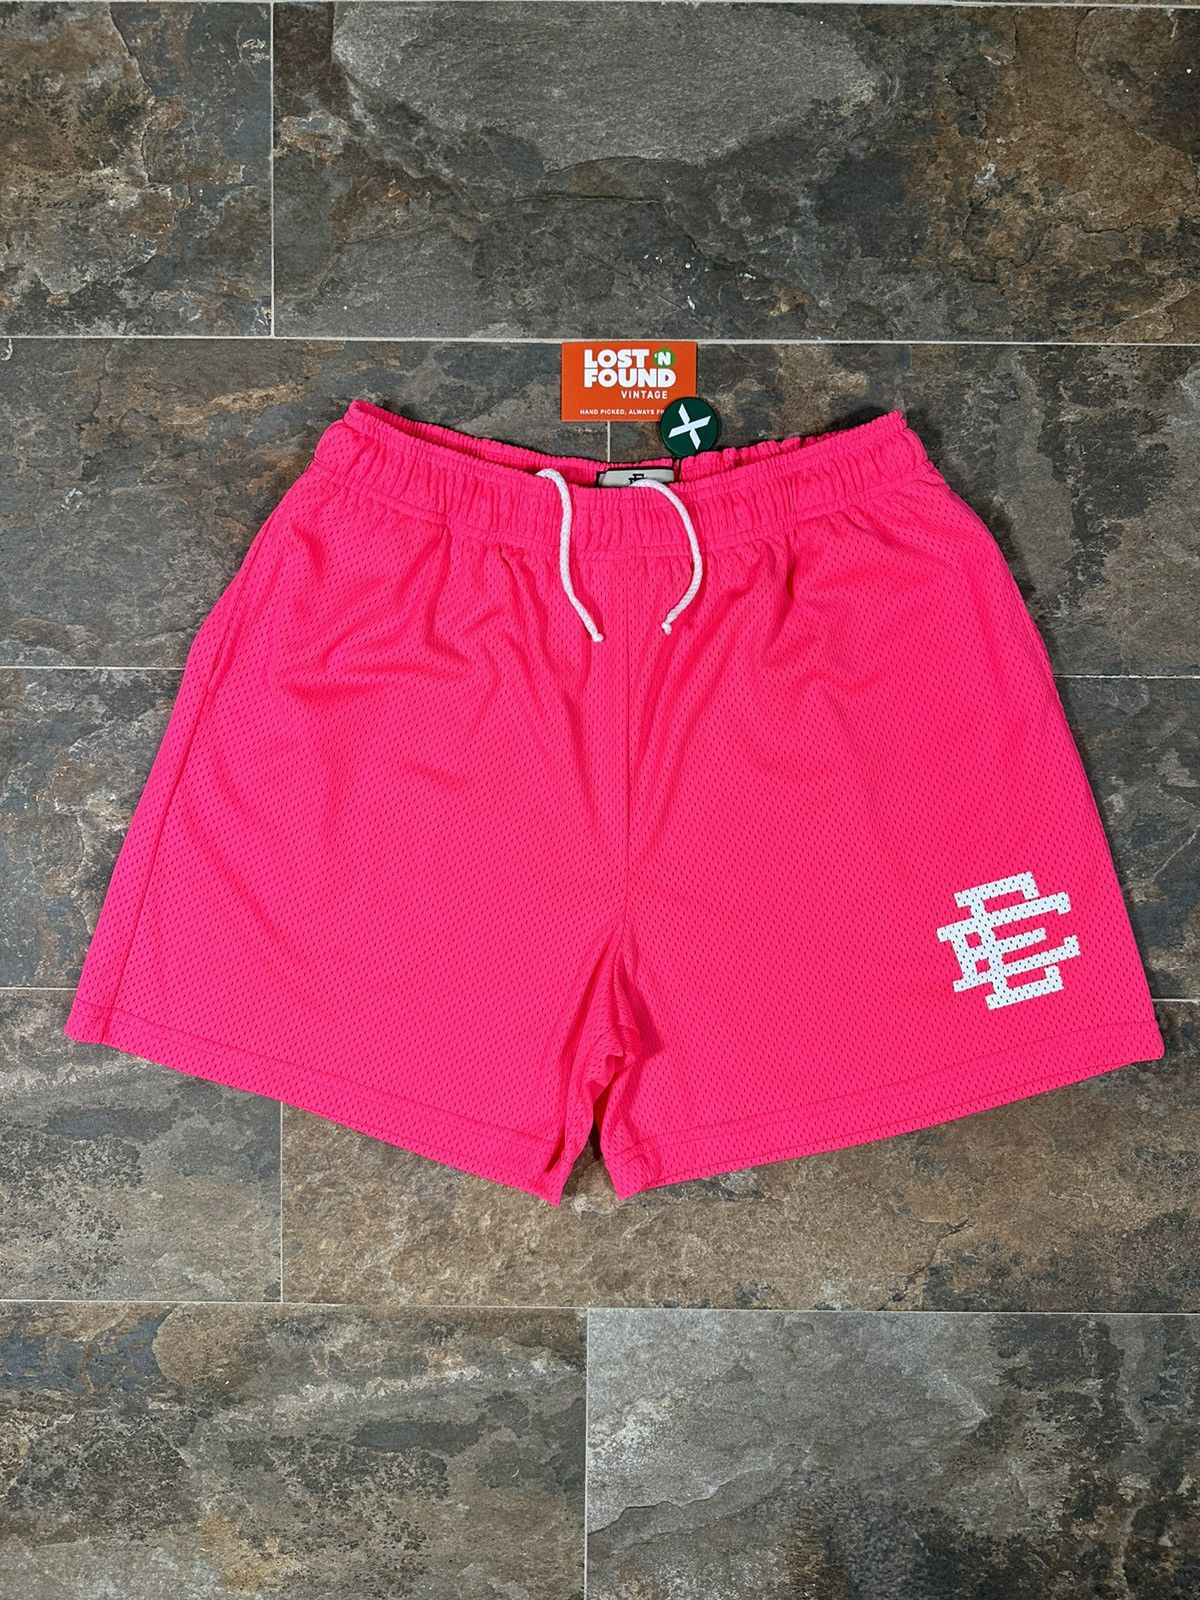 Pre-owned Eric Emanuel Ee Basic Shorts Neon Pink/white Size Xxl